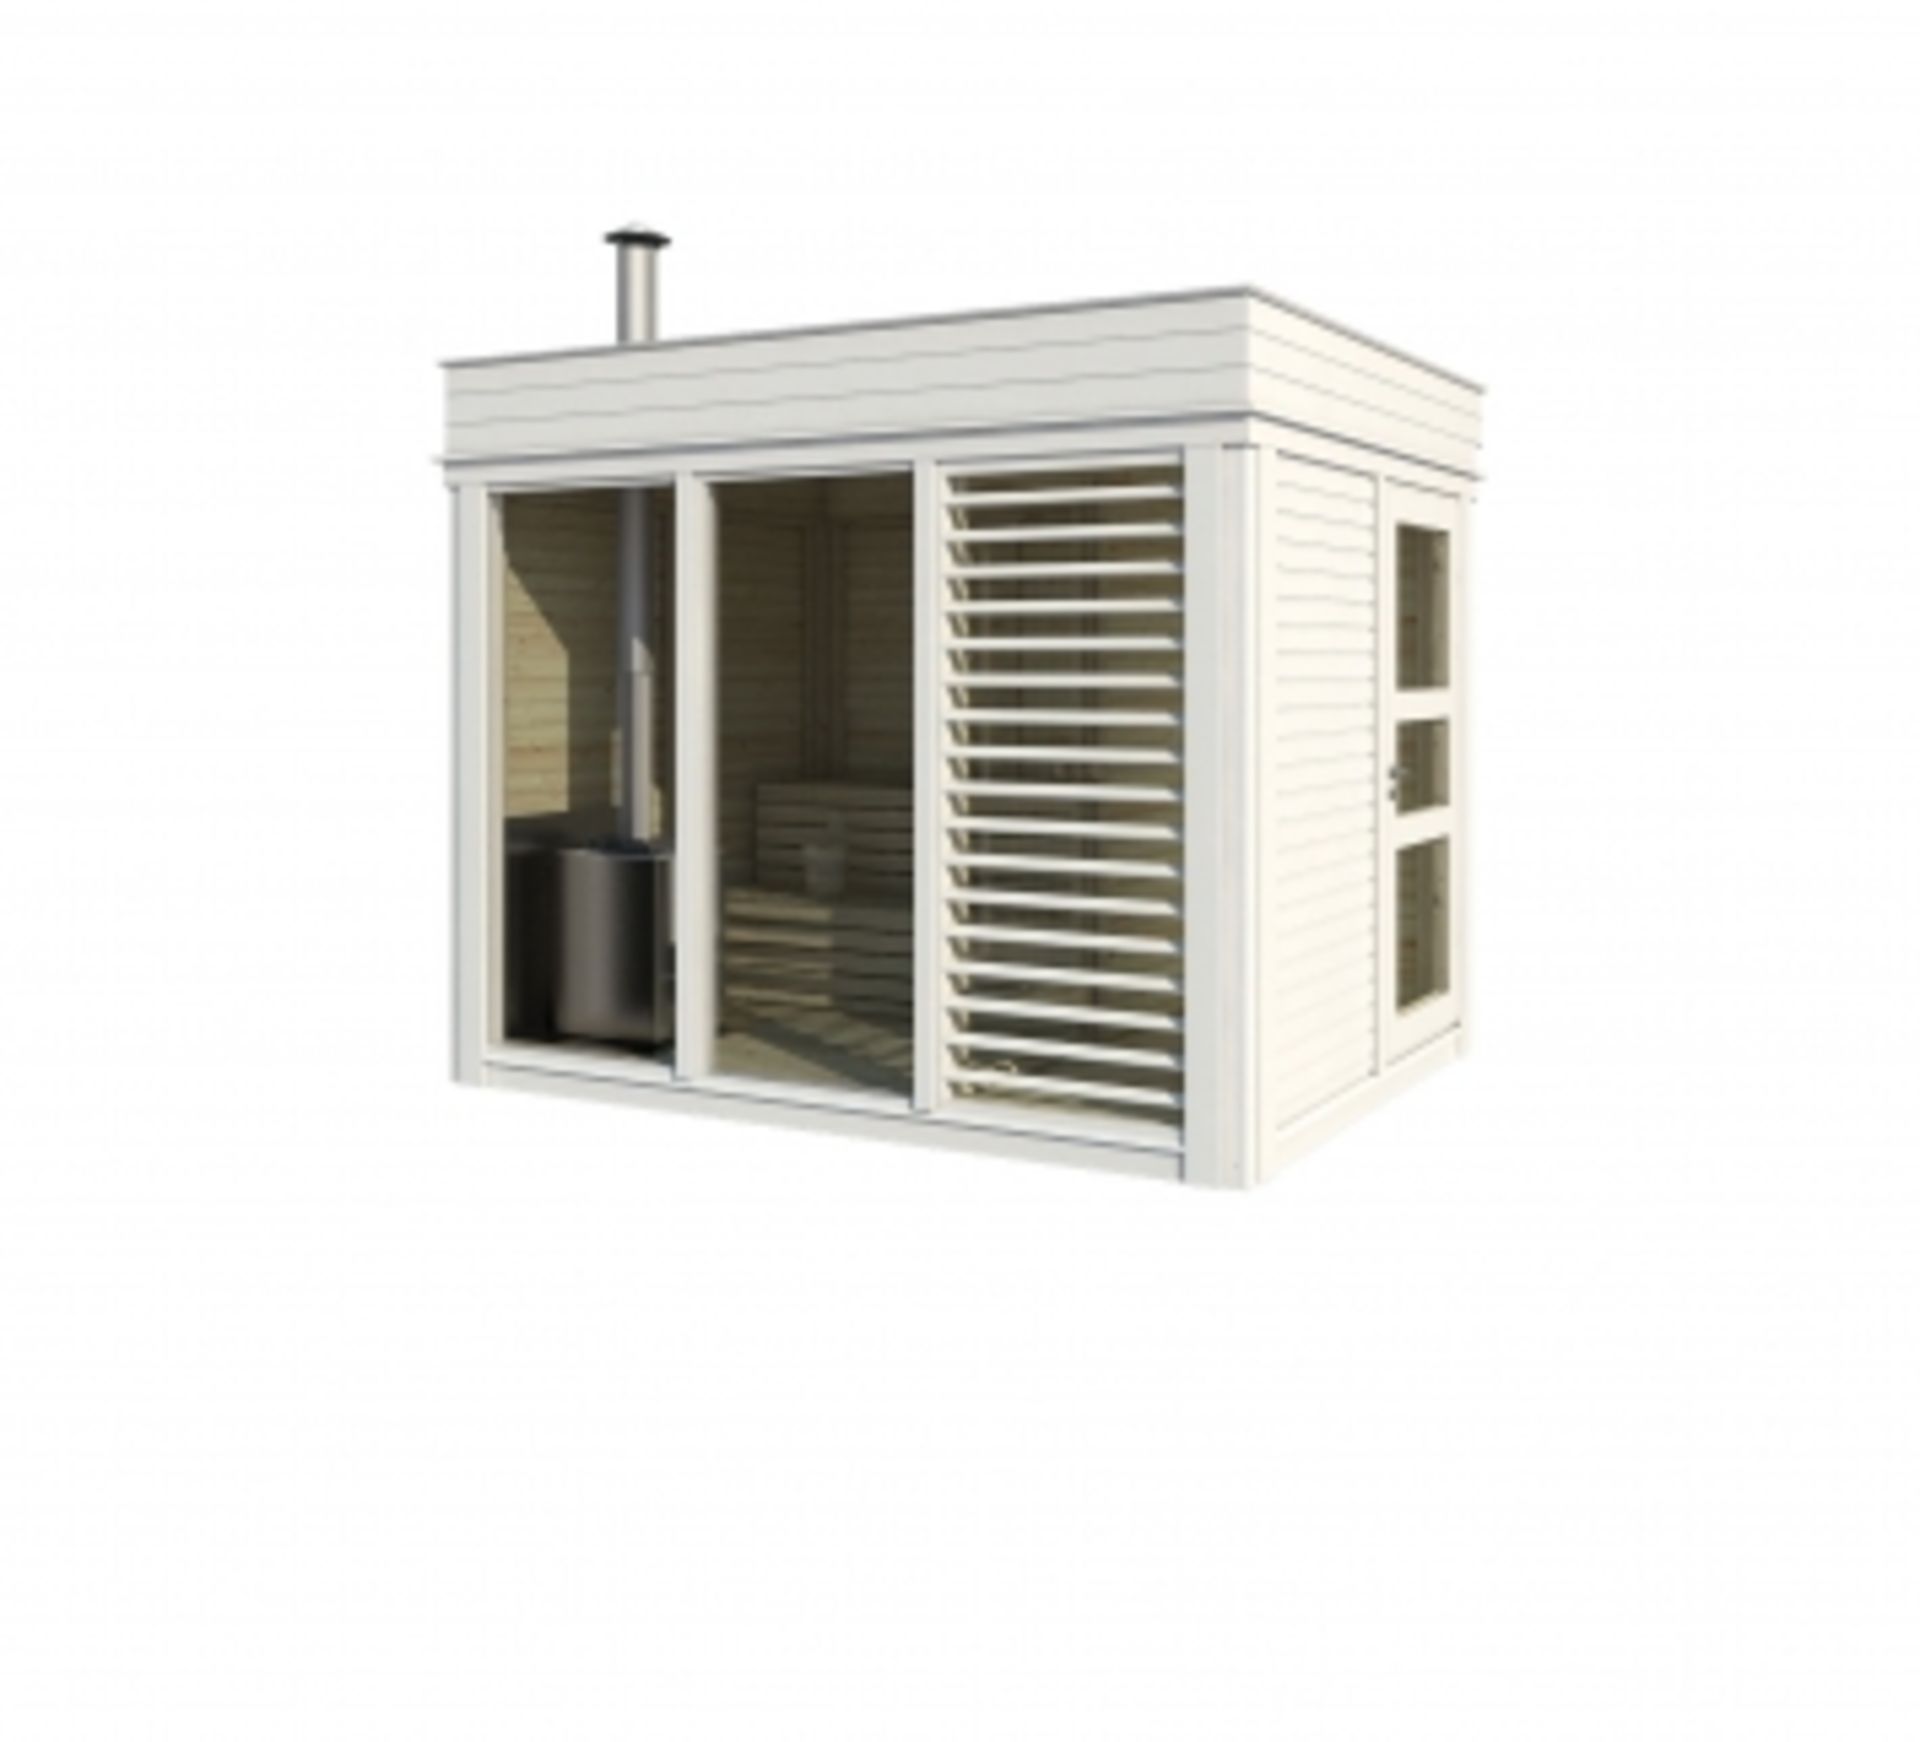 + VAT Brand New 2 x 3m Sauna Cube With Changing Room - Made From Spruce Wood - Roof Covered With